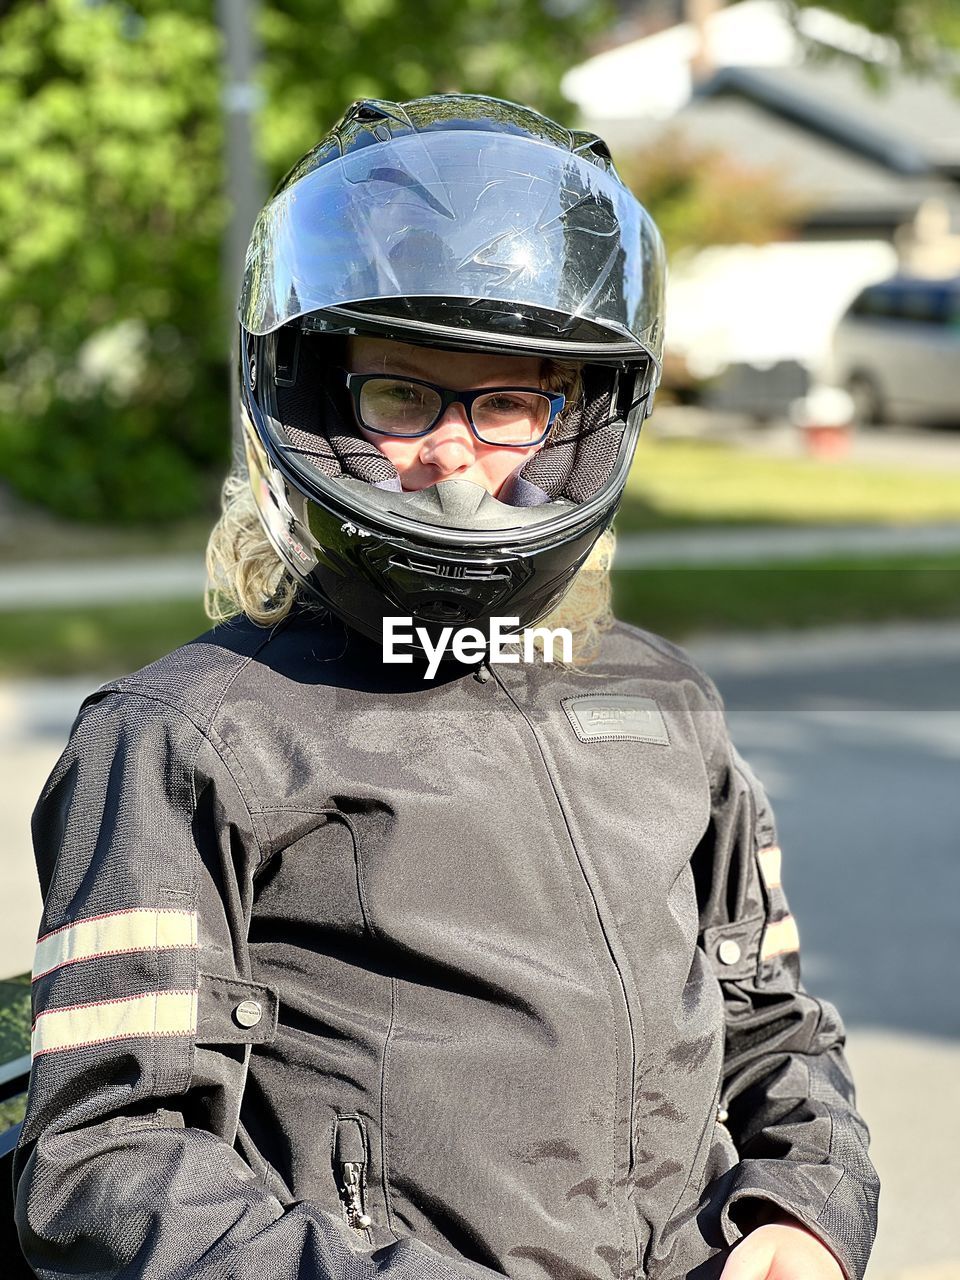 helmet, headwear, one person, sports helmet, sports, motorcycle helmet, crash helmet, protection, portrait, transportation, work helmet, men, security, sports equipment, day, clothing, personal protective equipment, front view, focus on foreground, person, looking at camera, mode of transportation, outdoors, vehicle, emotion, adult, military